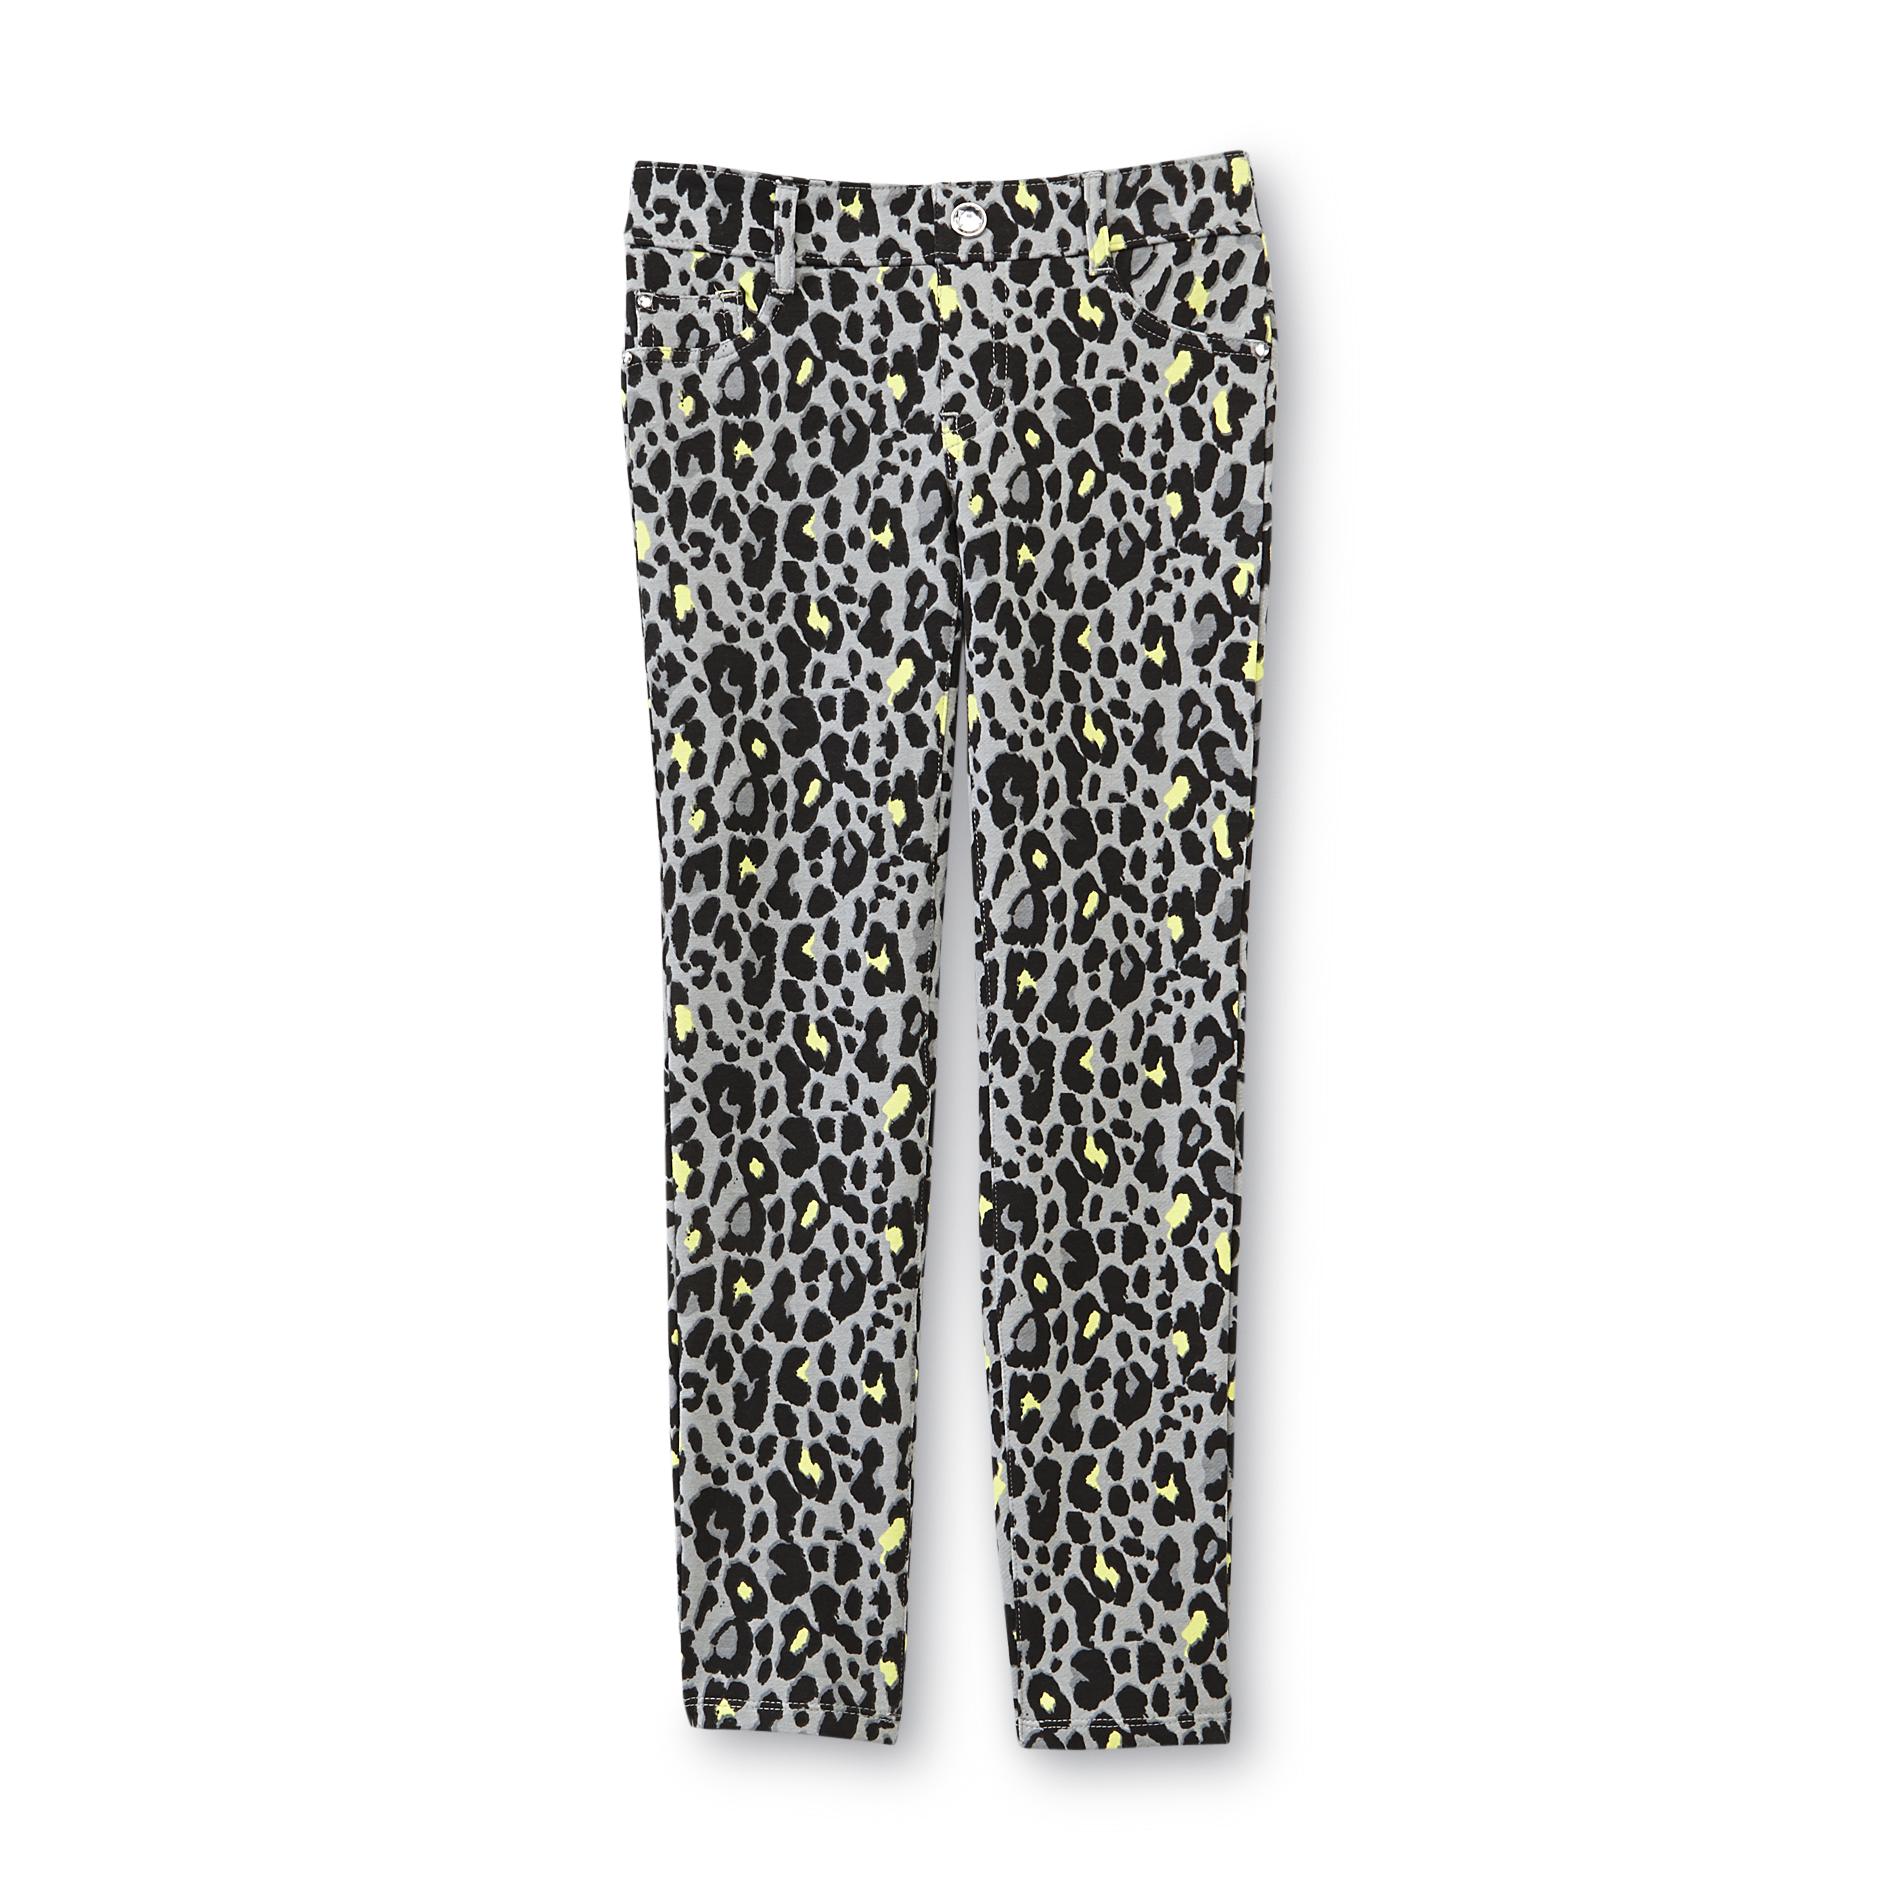 Piper Girl's French Terry Skinny Jeggings - Leopard Print